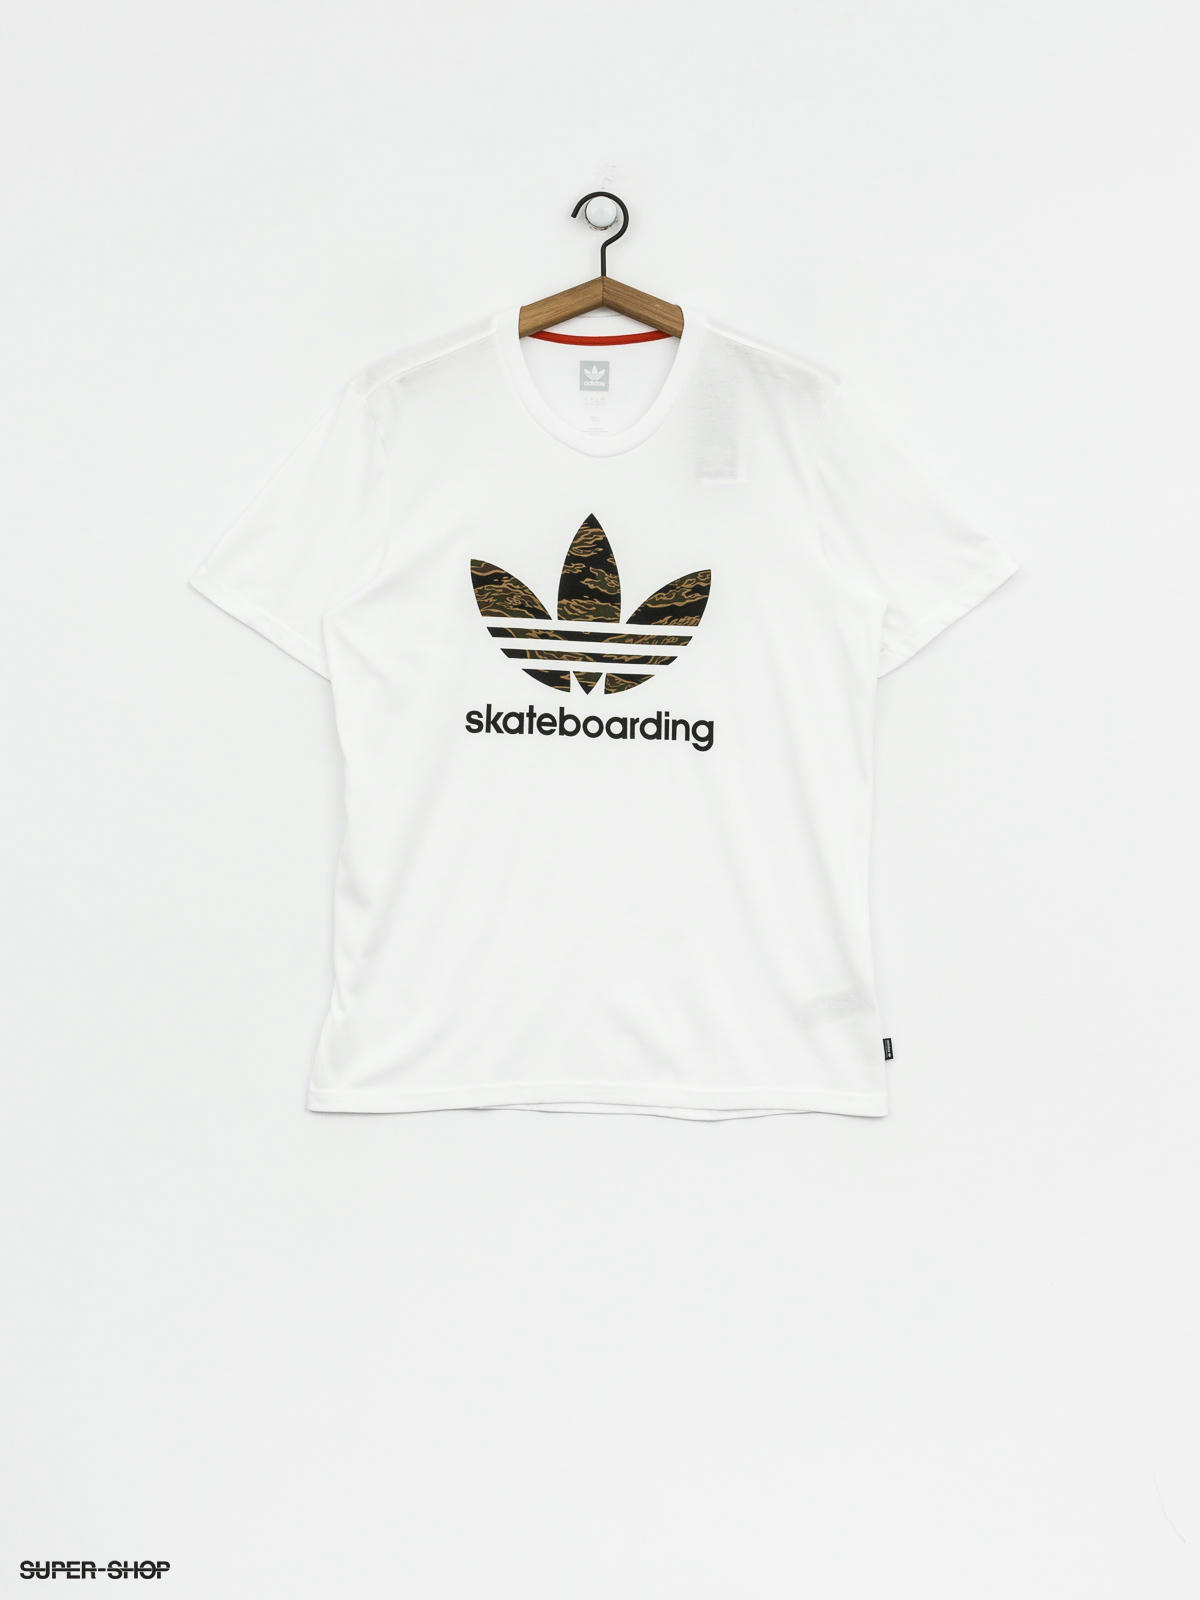 Adidas T Shirt Roblox Free Tissino - t shirt roblox adidas png image with transparent background